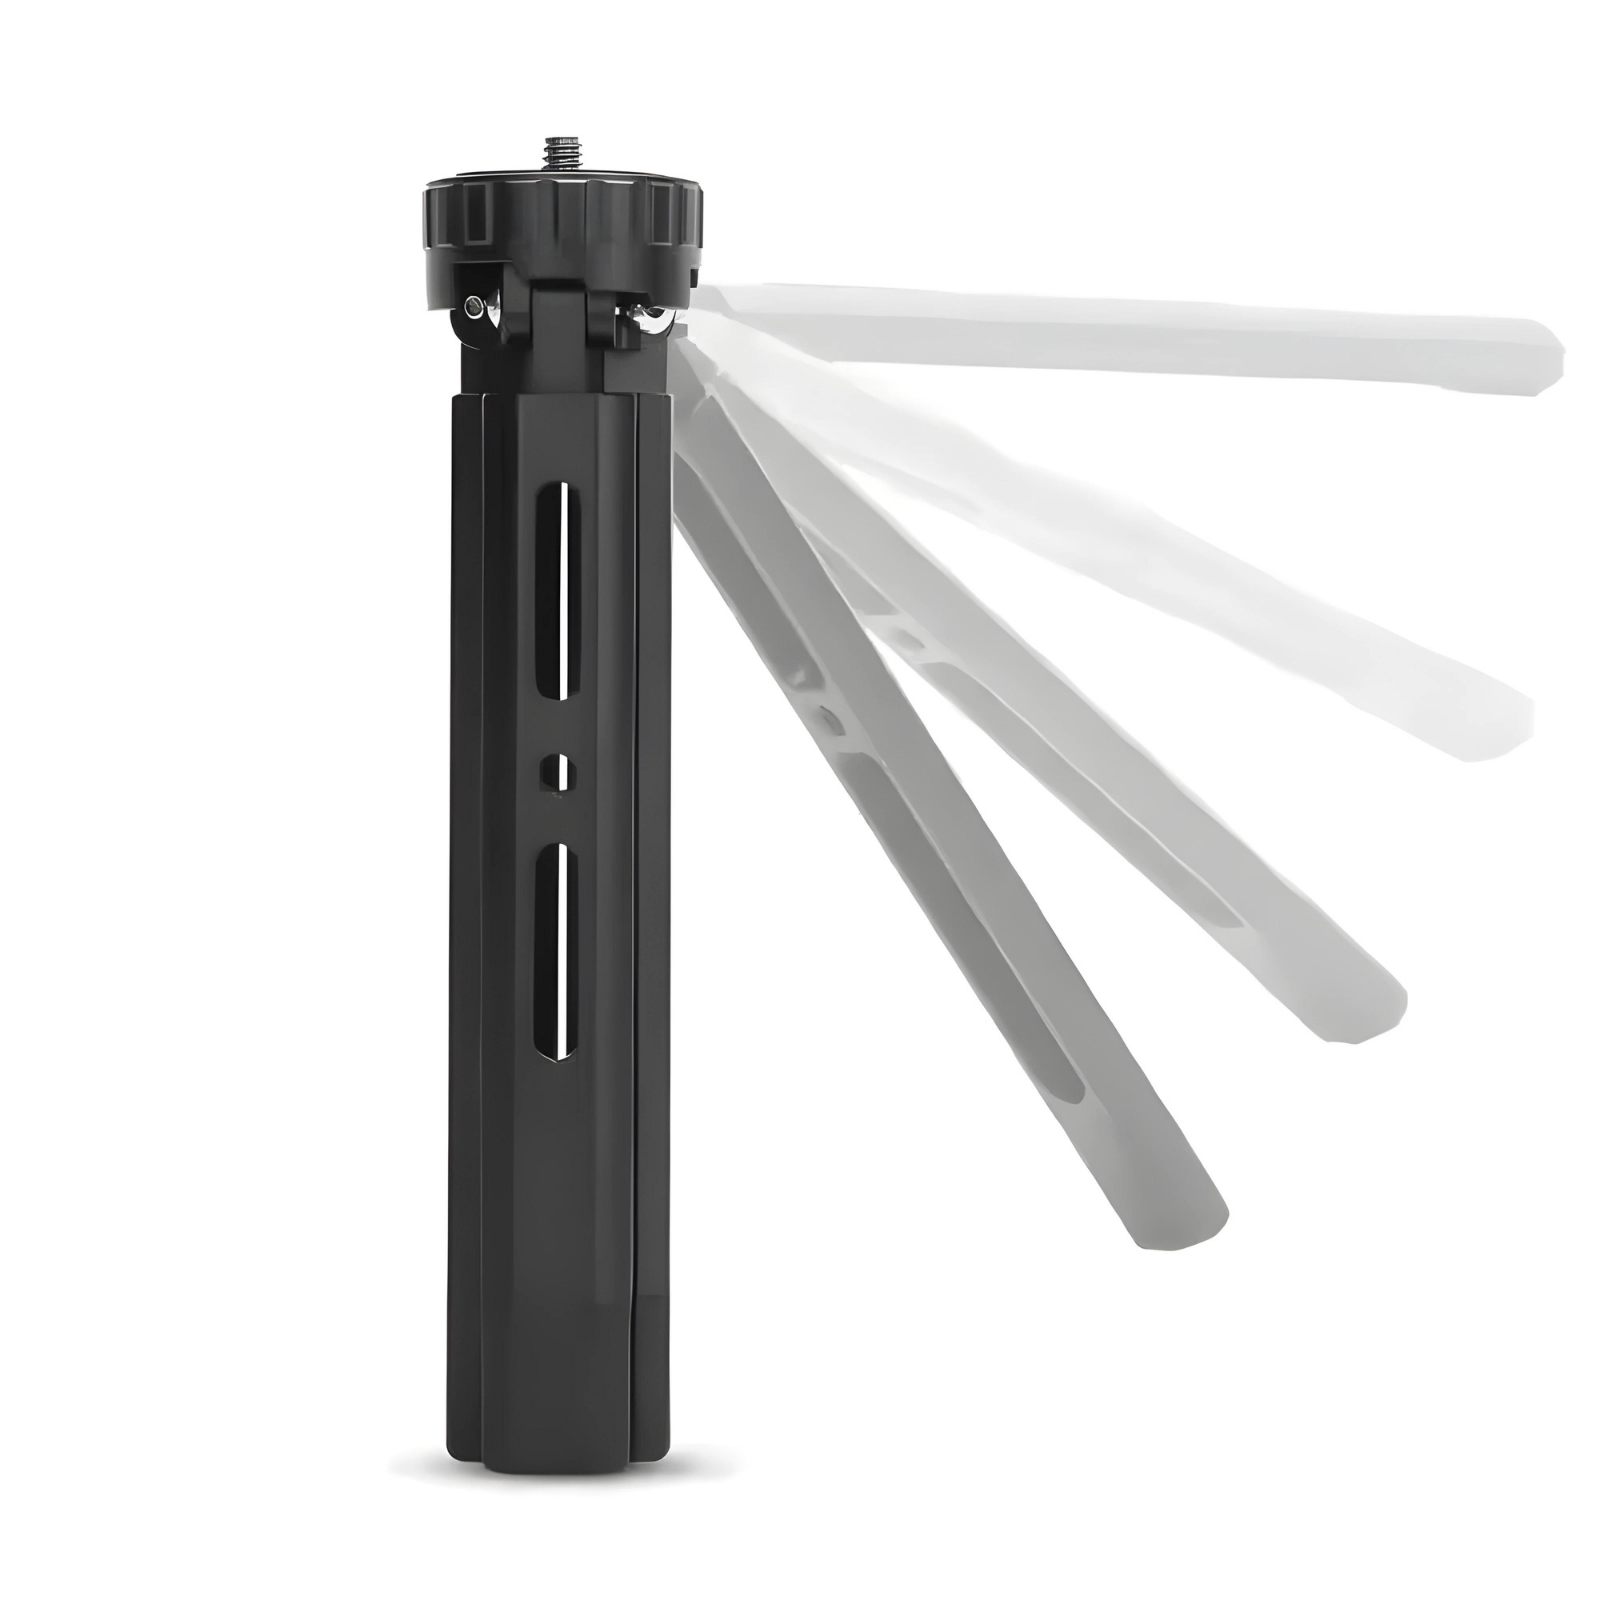 Compact Versatile Tripod: Light & Sturdy for All Photographers